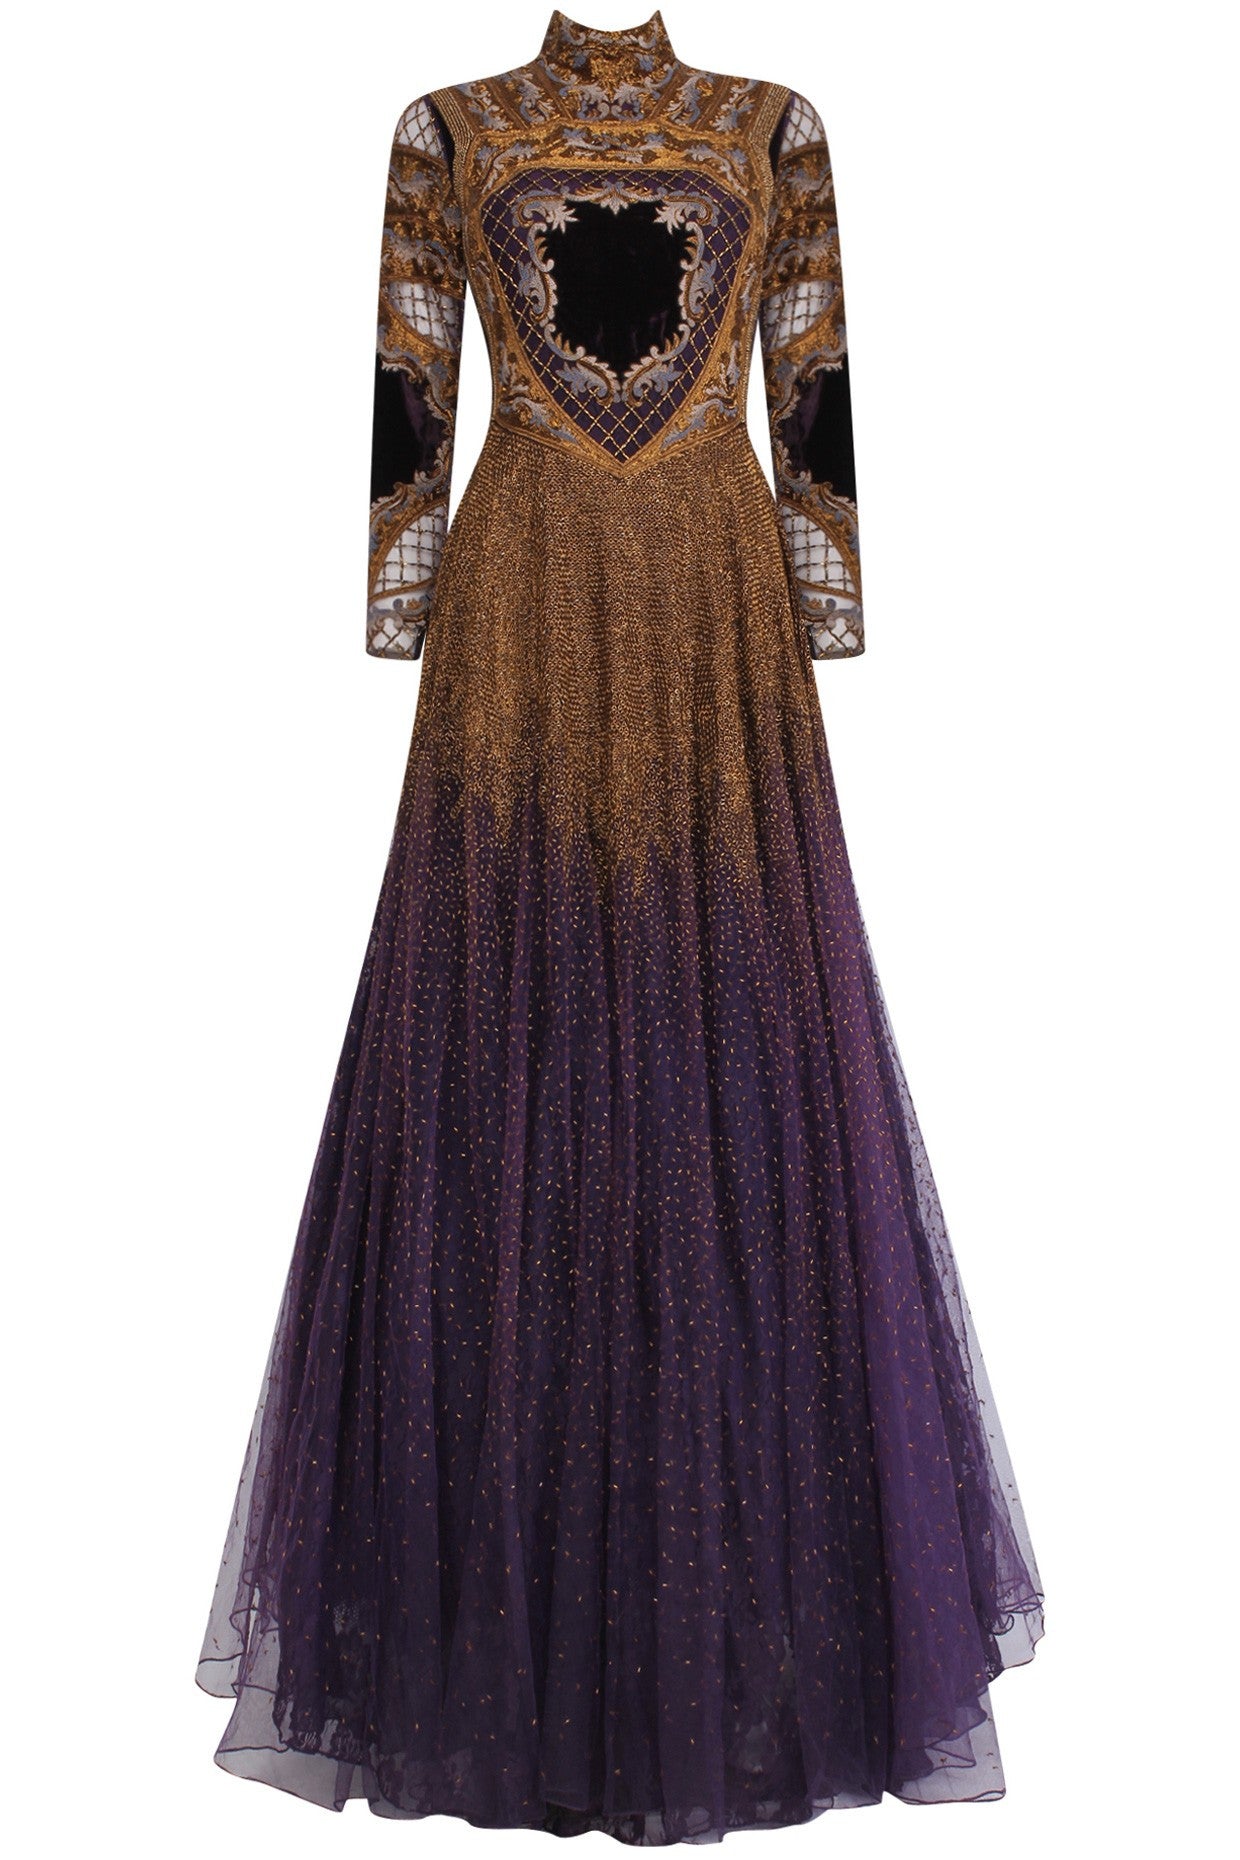 Voilet color Indo Western Gown by Panache Haute Couture